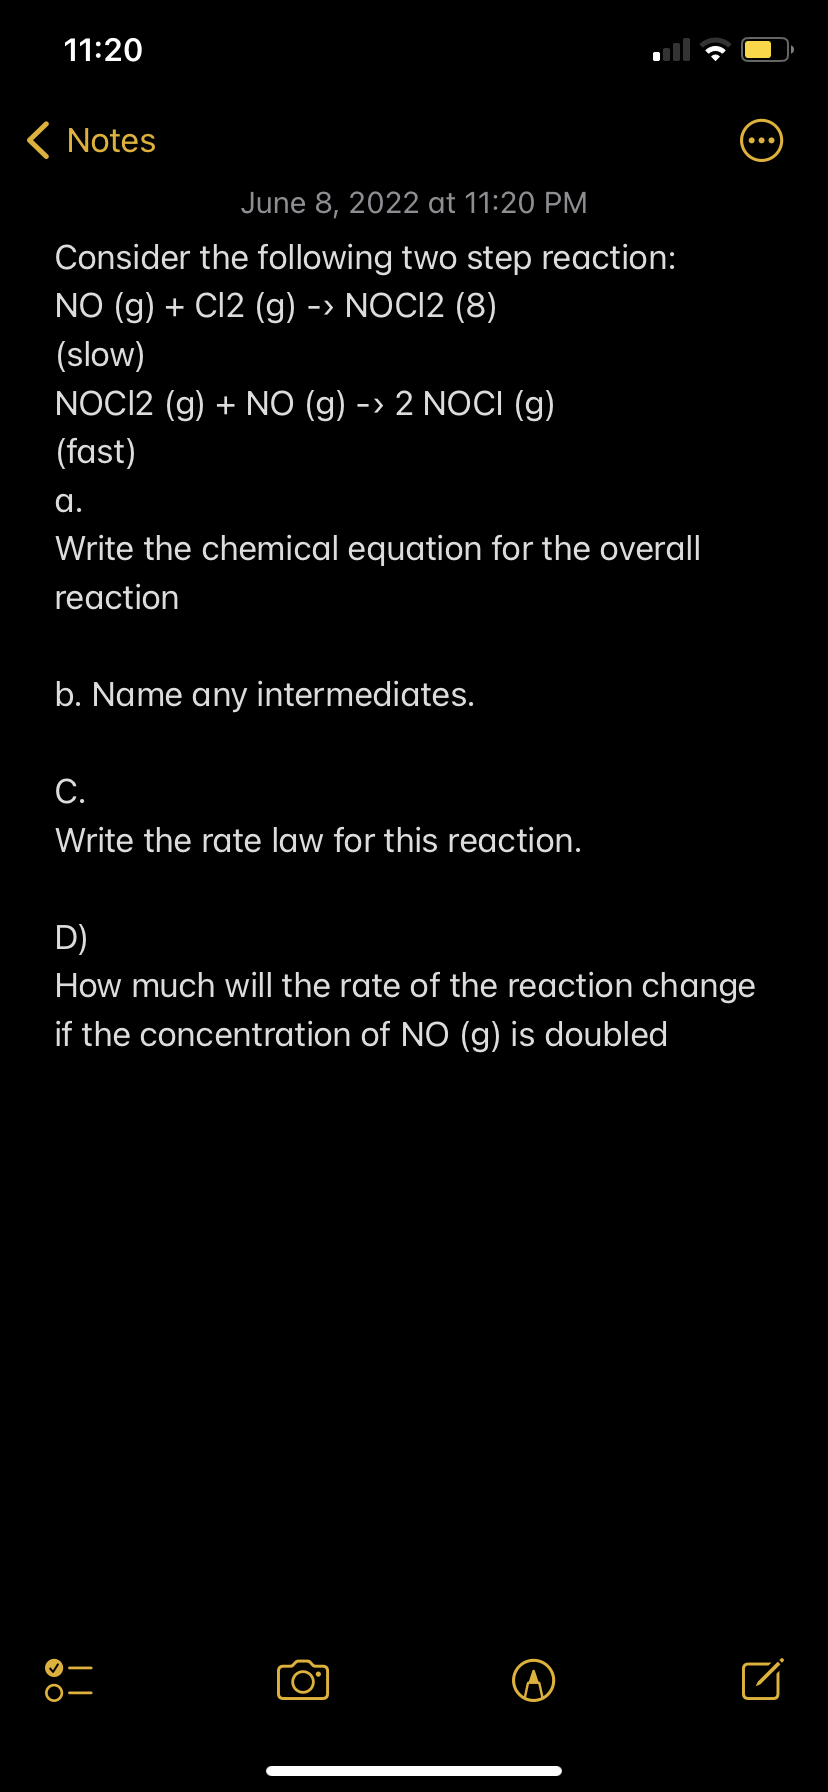 11:20
< Notes
June 8, 2022 at 11:20 PM
Consider the following two step reaction:
NO (g) + Cl2 (g) -> NOCI2 (8)
(slow)
NOC12 (g) + NO (g) -> 2 NOCI (g)
(fast)
a.
Write the chemical equation for the overall
reaction
b. Name any intermediates.
C.
Write the rate law for this reaction.
D)
How much will the rate of the reaction change
if the concentration of NO (g) is doubled
□
O